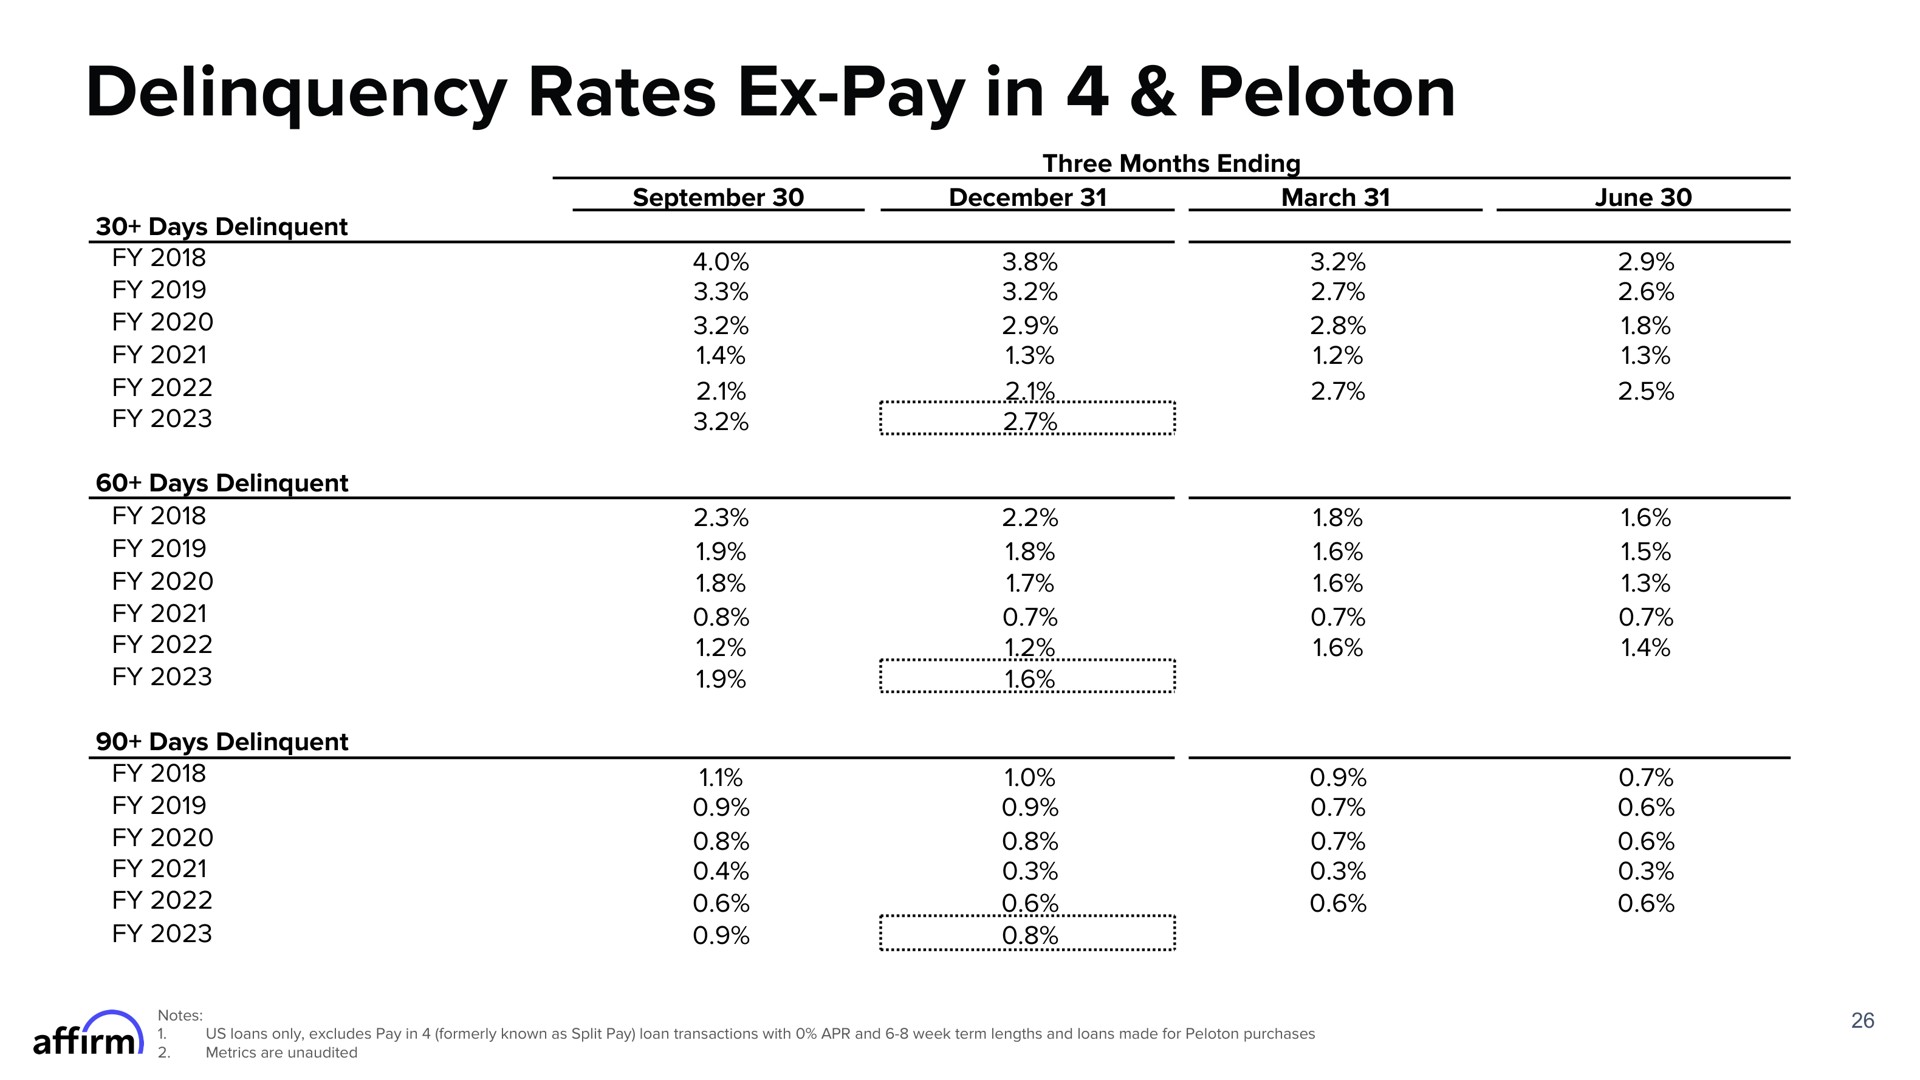 delinquency rates pay in peloton | Affirm